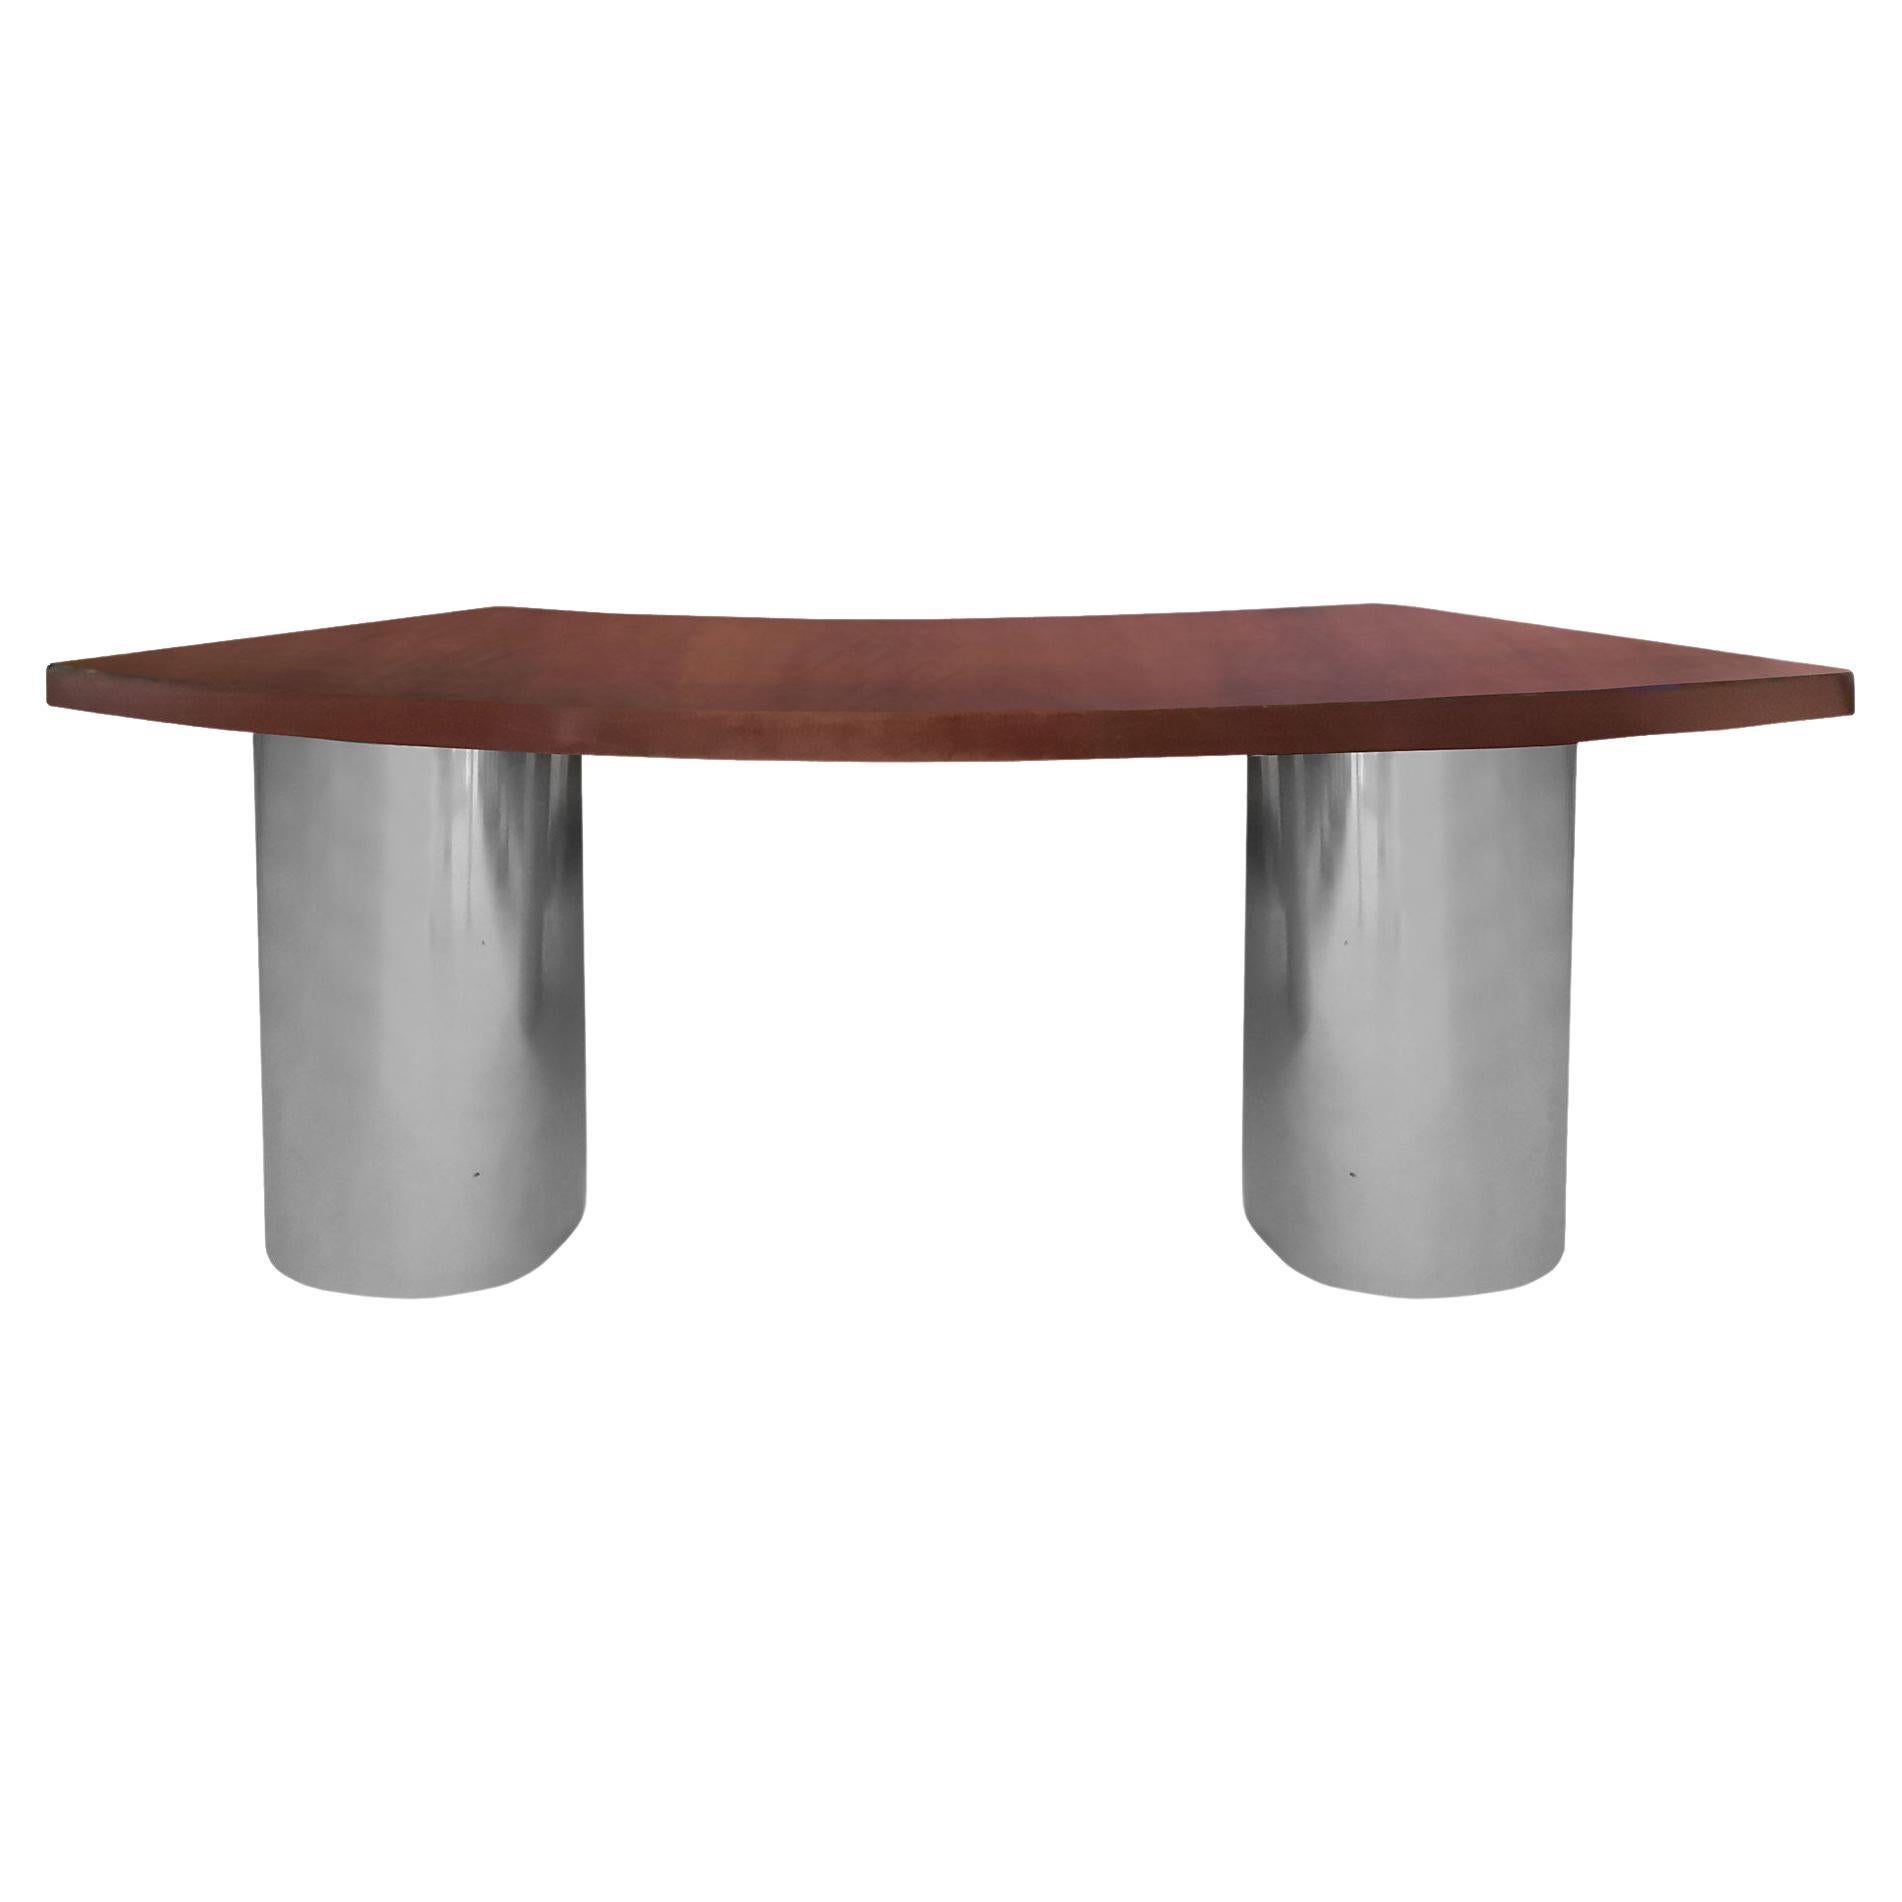 1970's "Boomerang" Desk in Walnut, Chrome Plated Steel and Glass - Italy